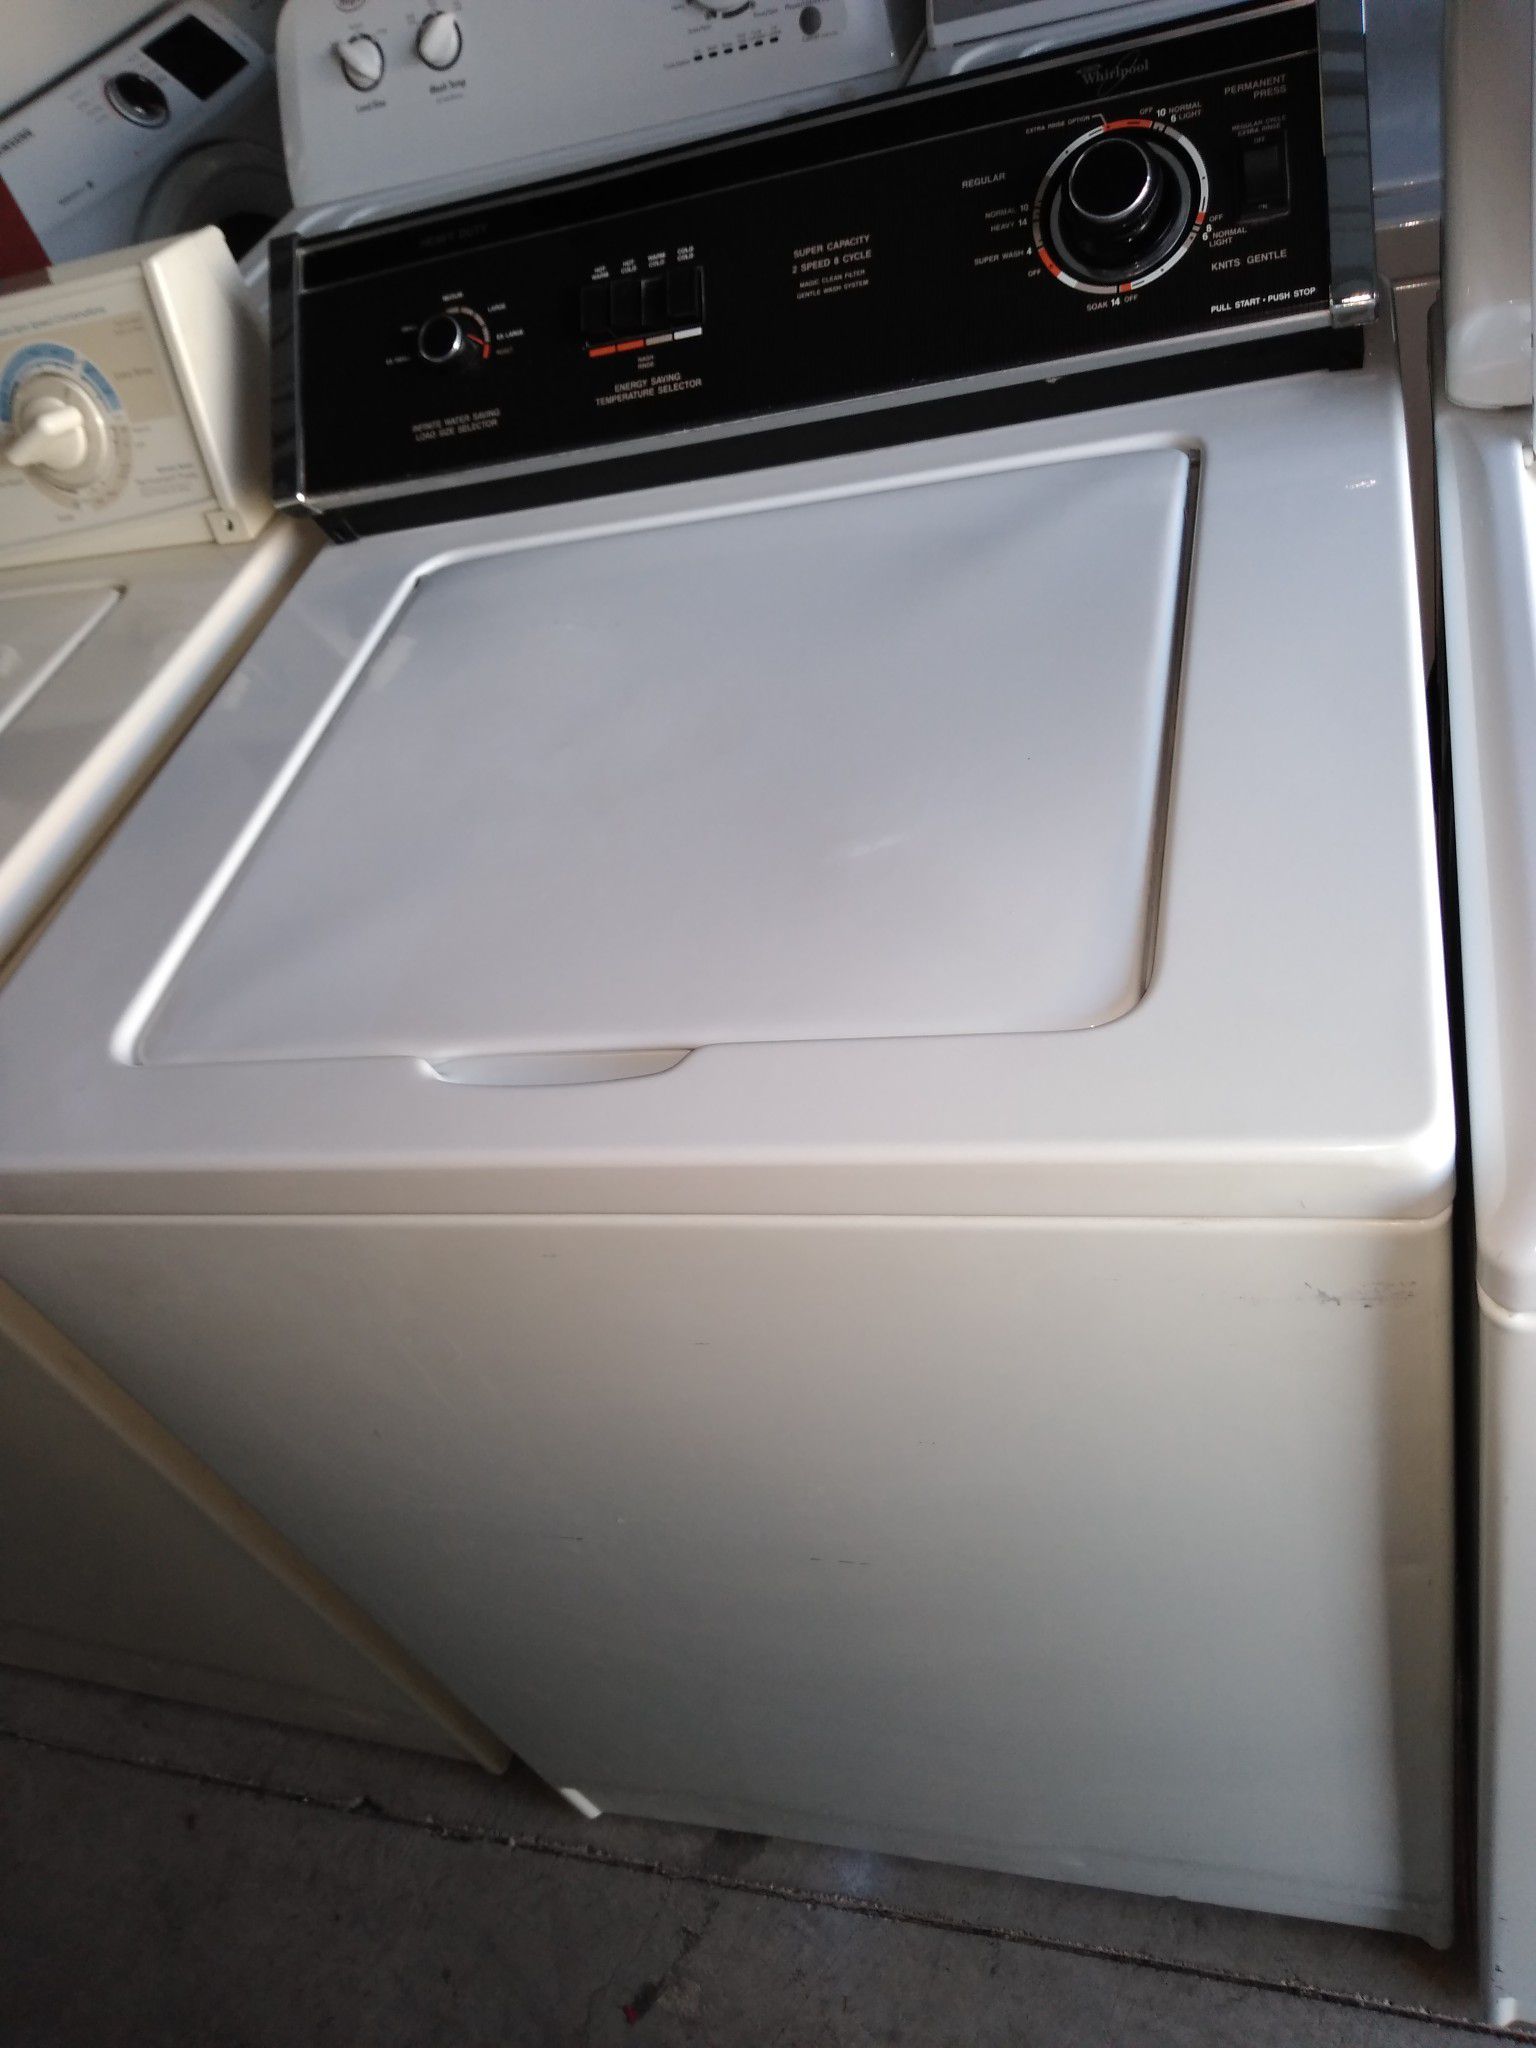 Whirlpool washer working great 30 days warranty free delivery and installation